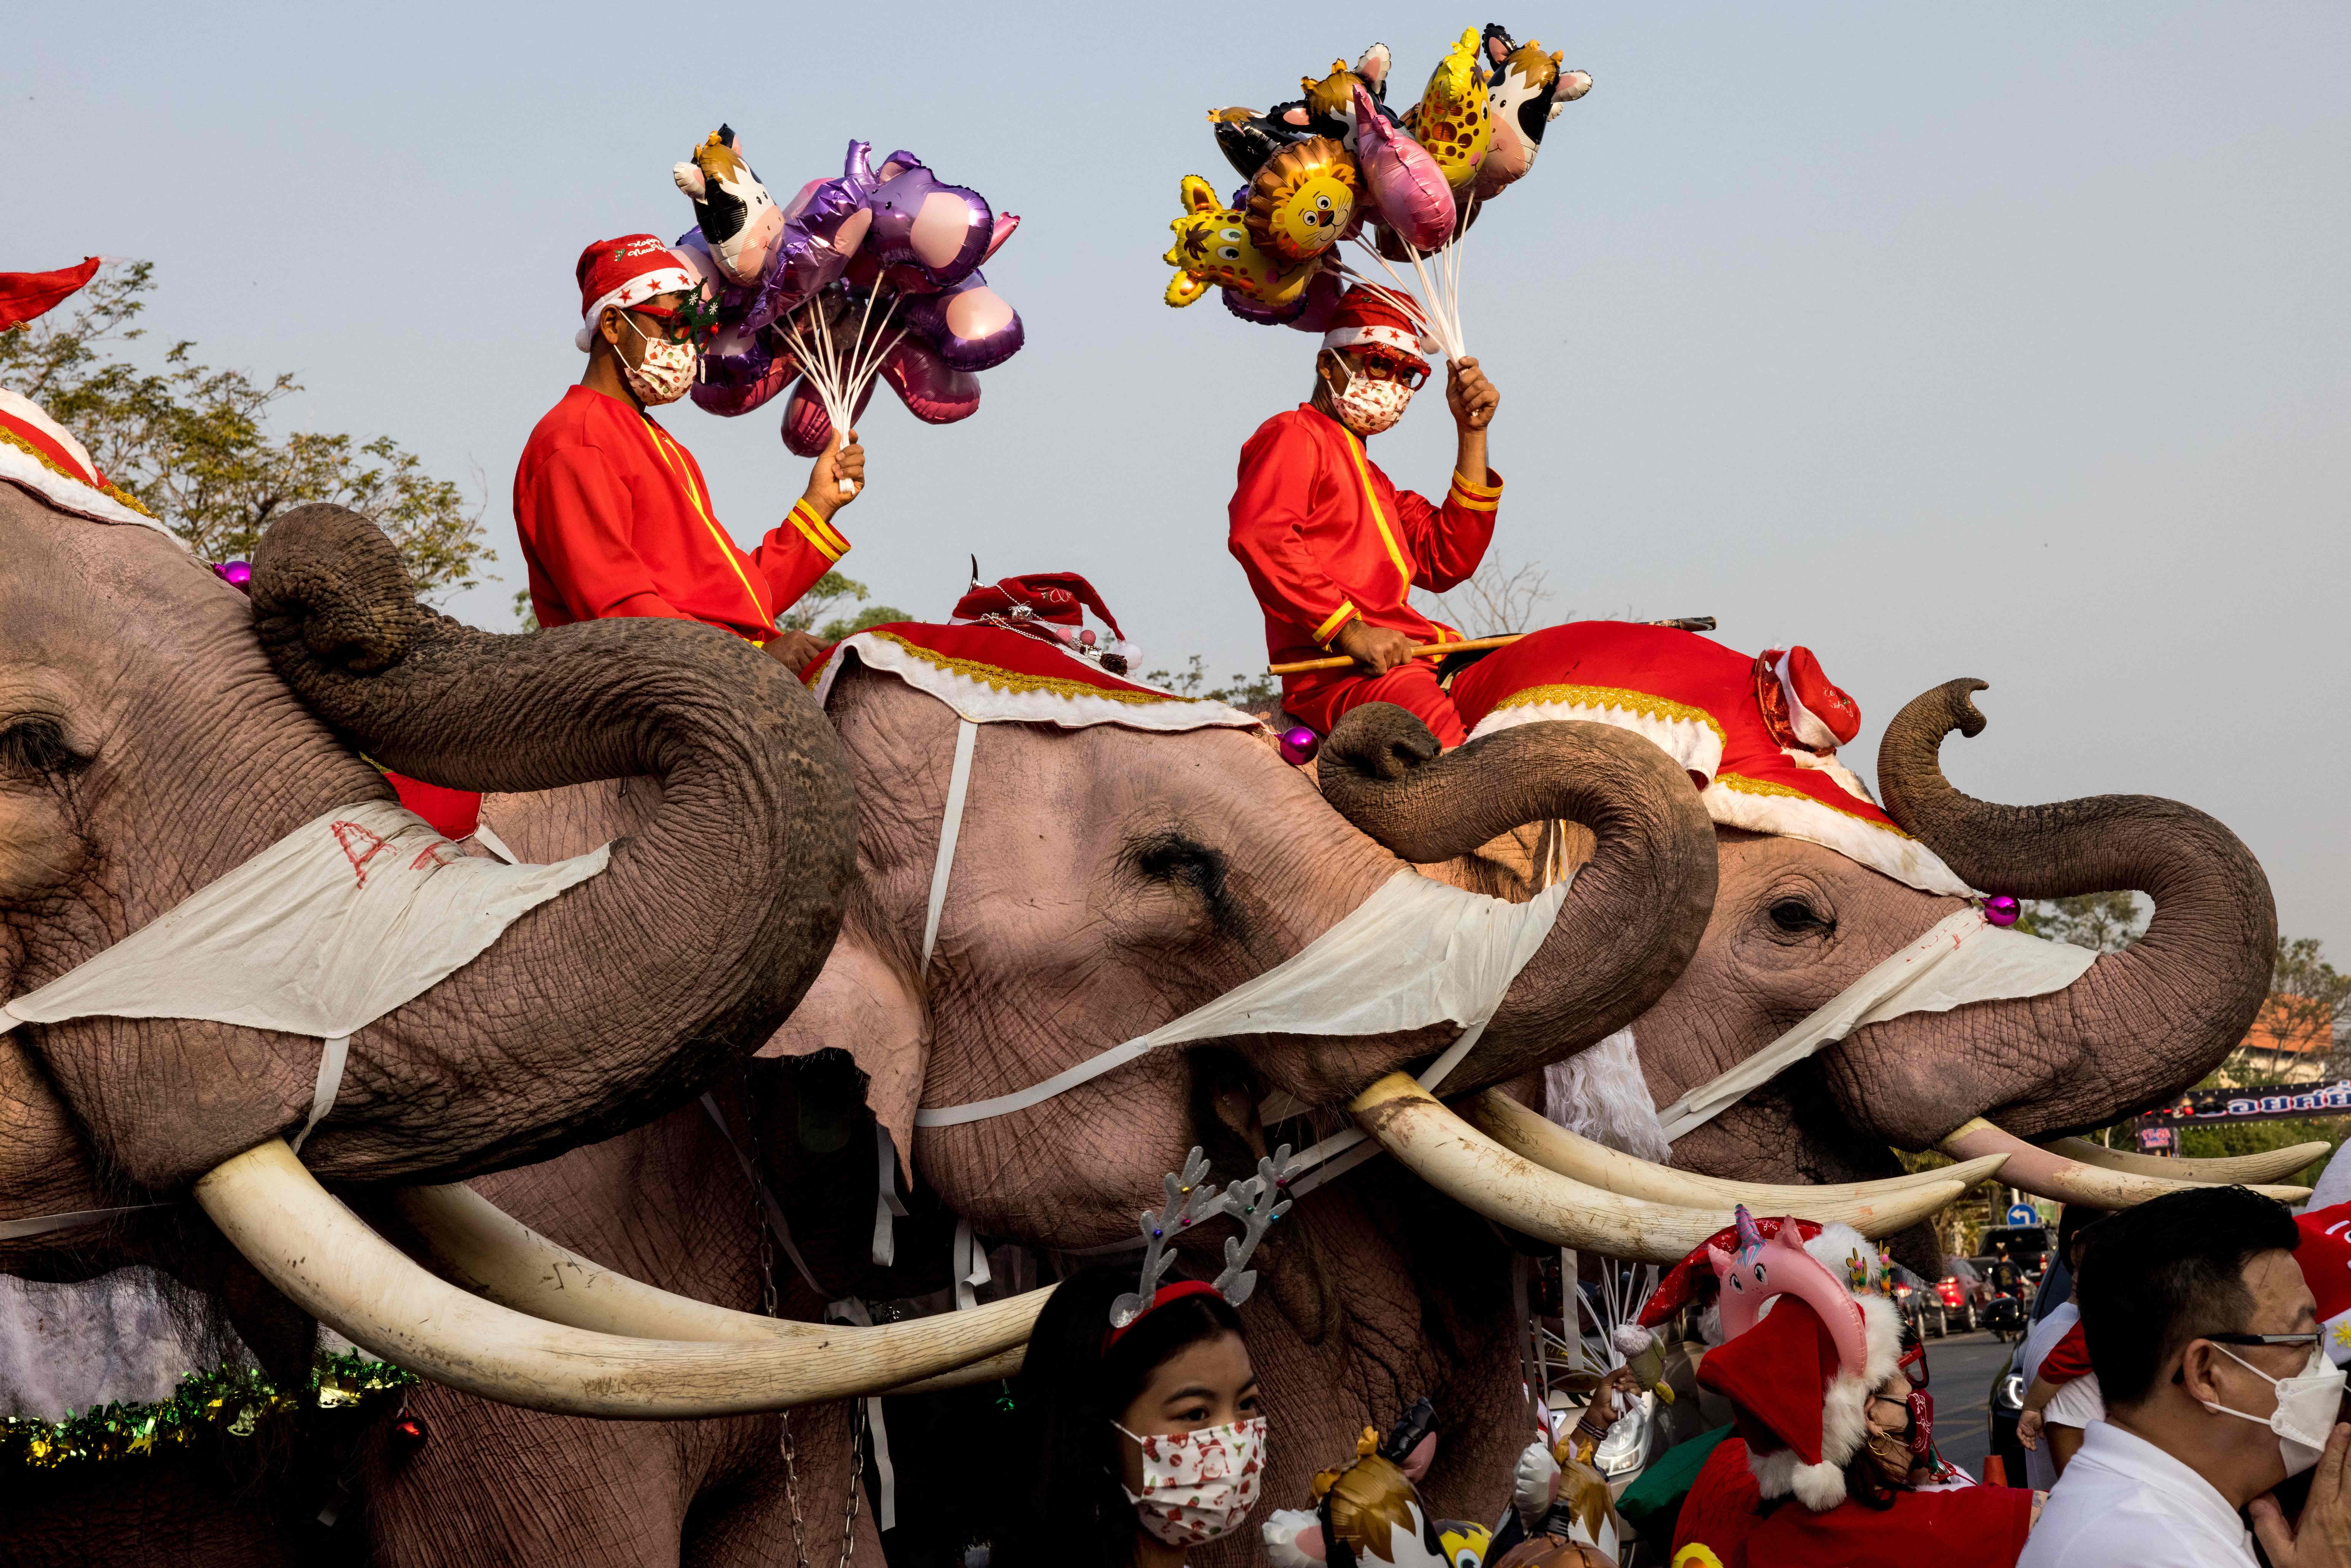 Mahouts and their elephants pose for children during Christmas celebrations at the Jirasart Witthaya school in Ayutthaya on 24 December 2021